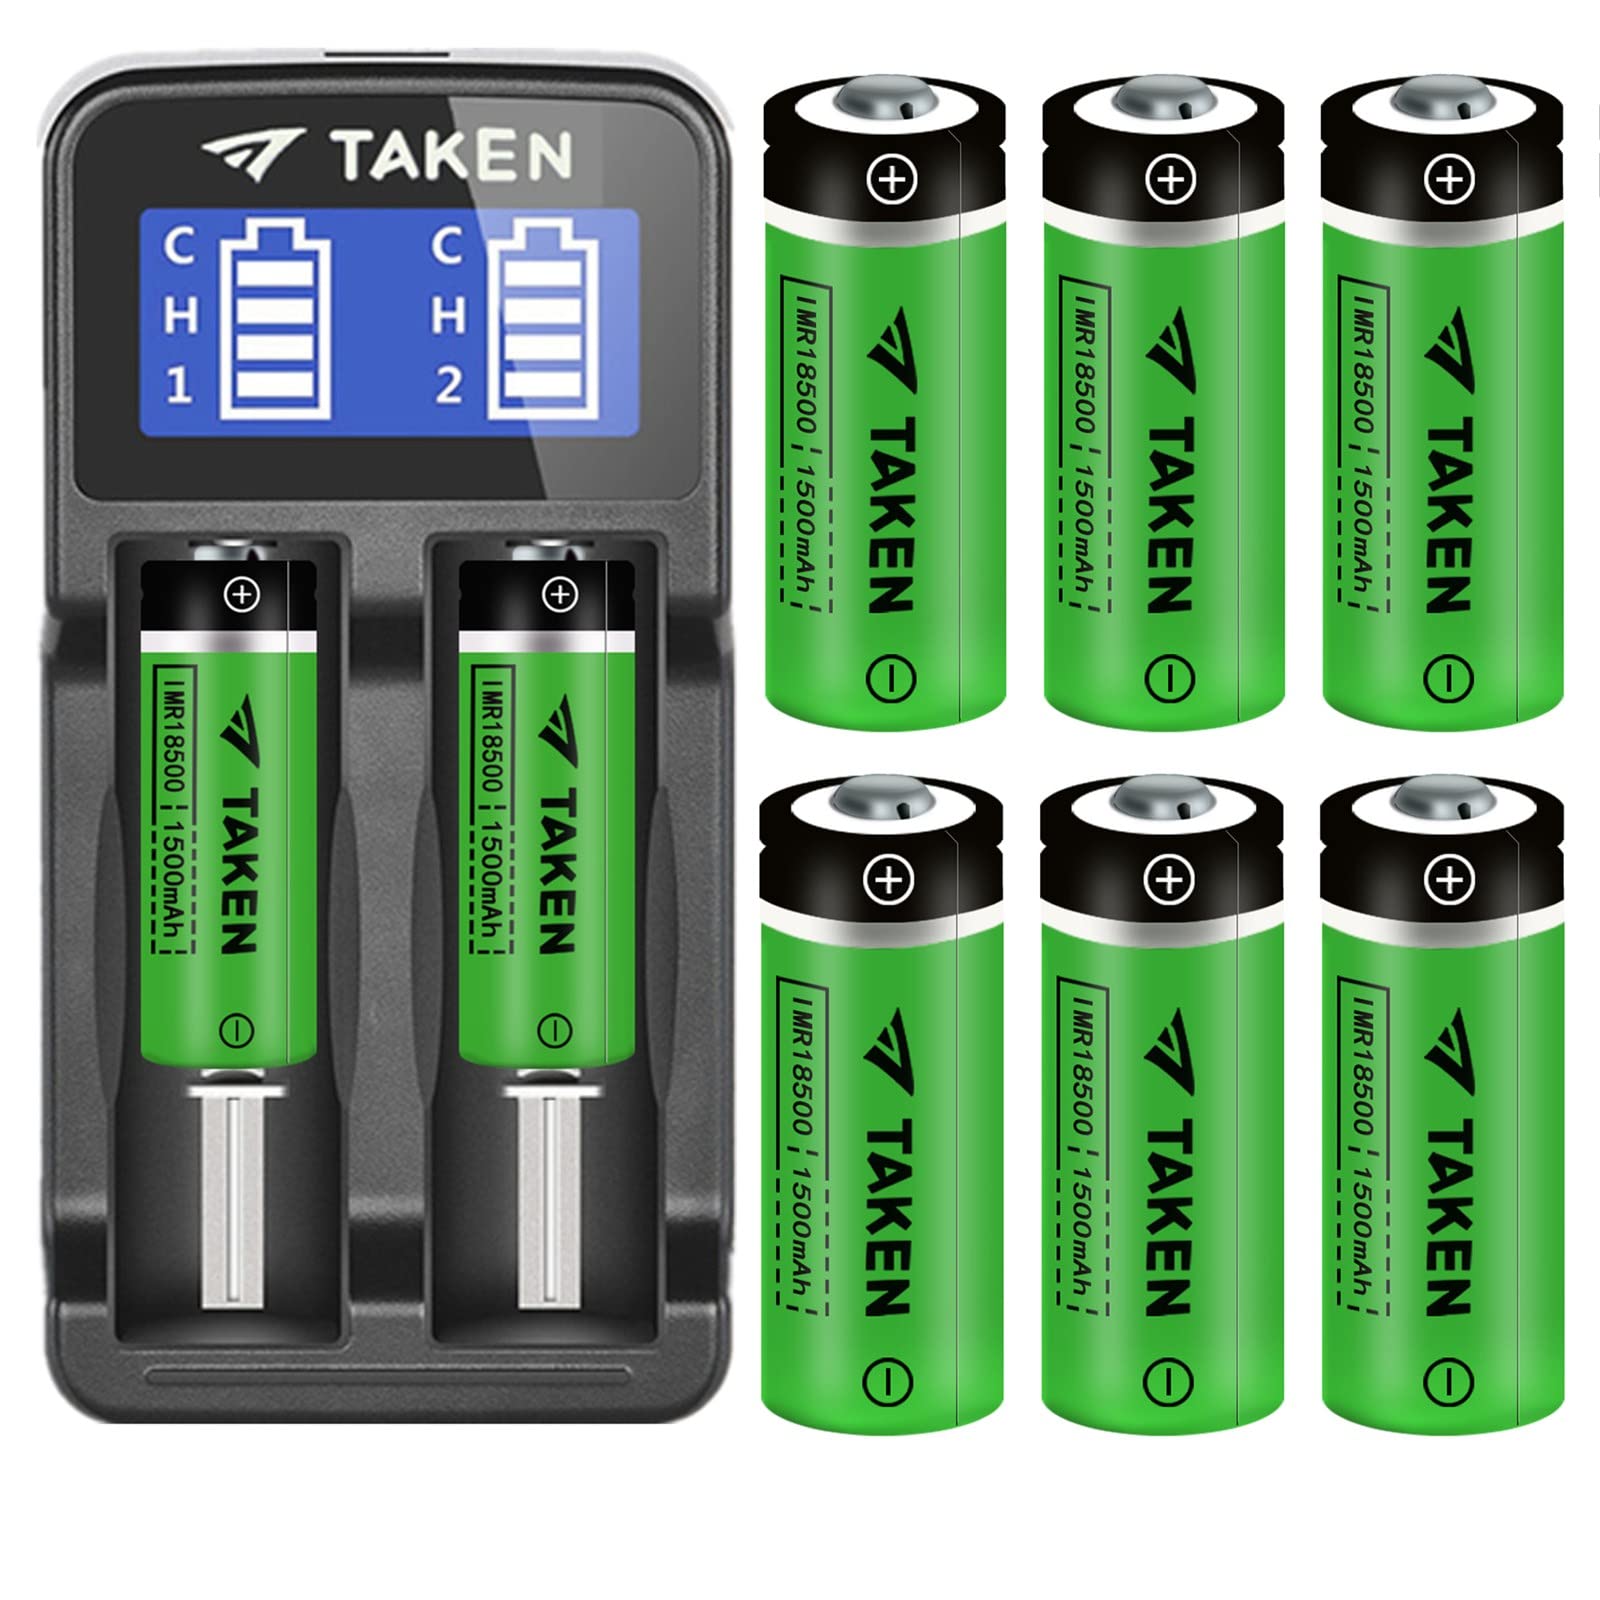 Taken 18500 Rechargeable Li-ion Battery with Charger, IMR 18500 3.7V 1500mAh Rechargeable Battery with Button Top, 8 Pack 18500 Rechargeable Batteries with 2-Ports Charger